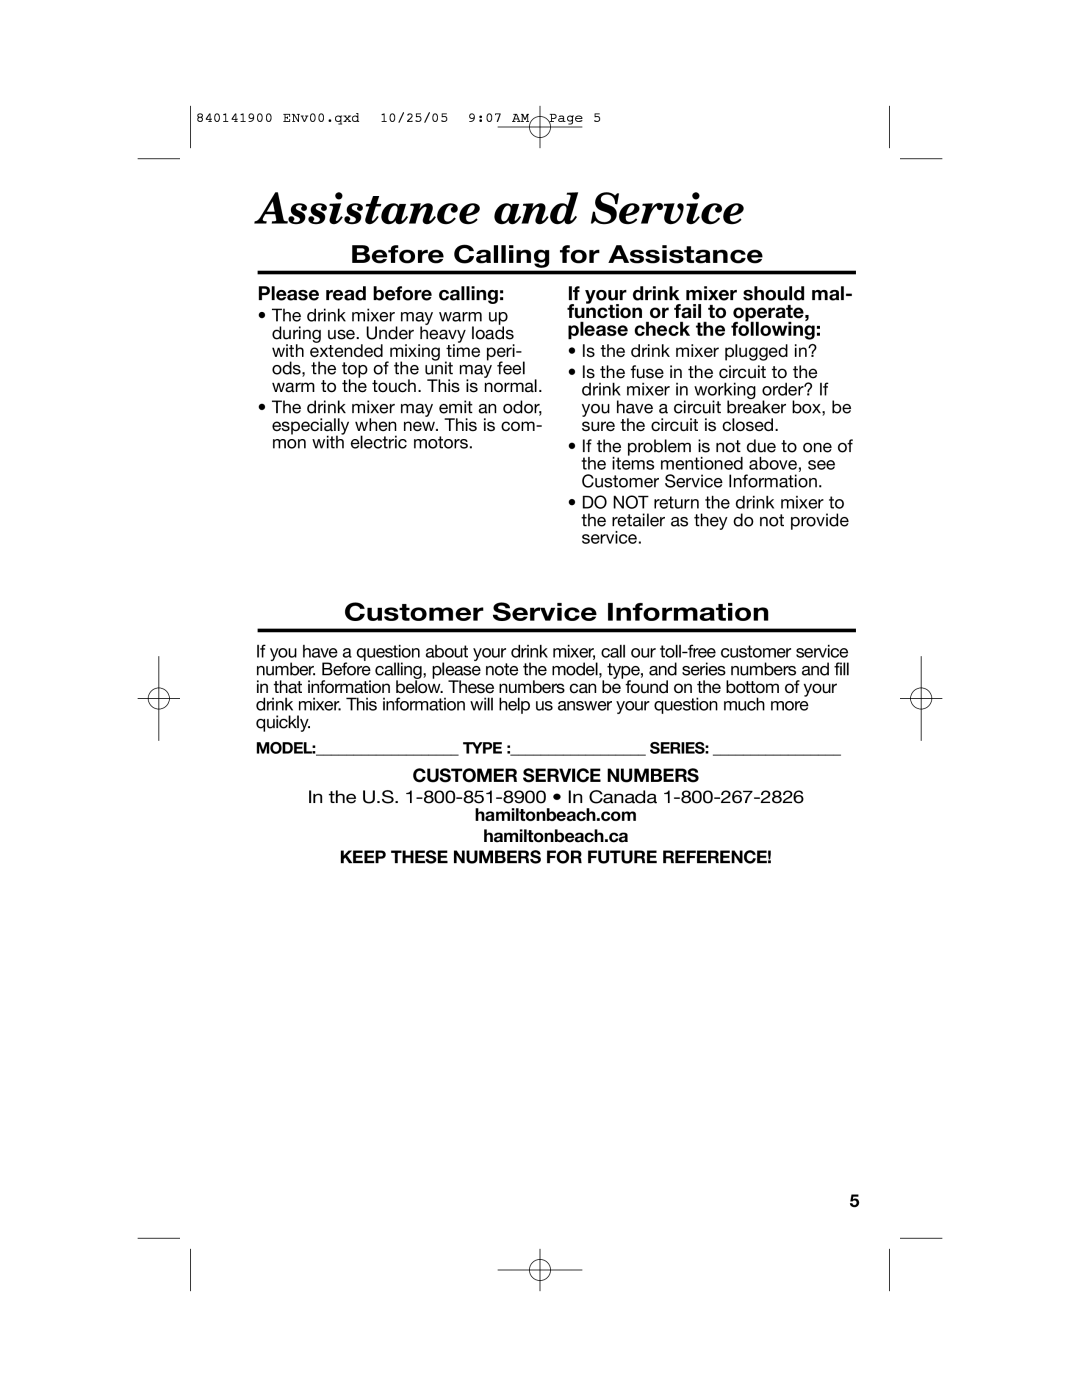 Hamilton Beach 840141900 manual Assistance and Service, Before Calling for Assistance, Customer Service Information 